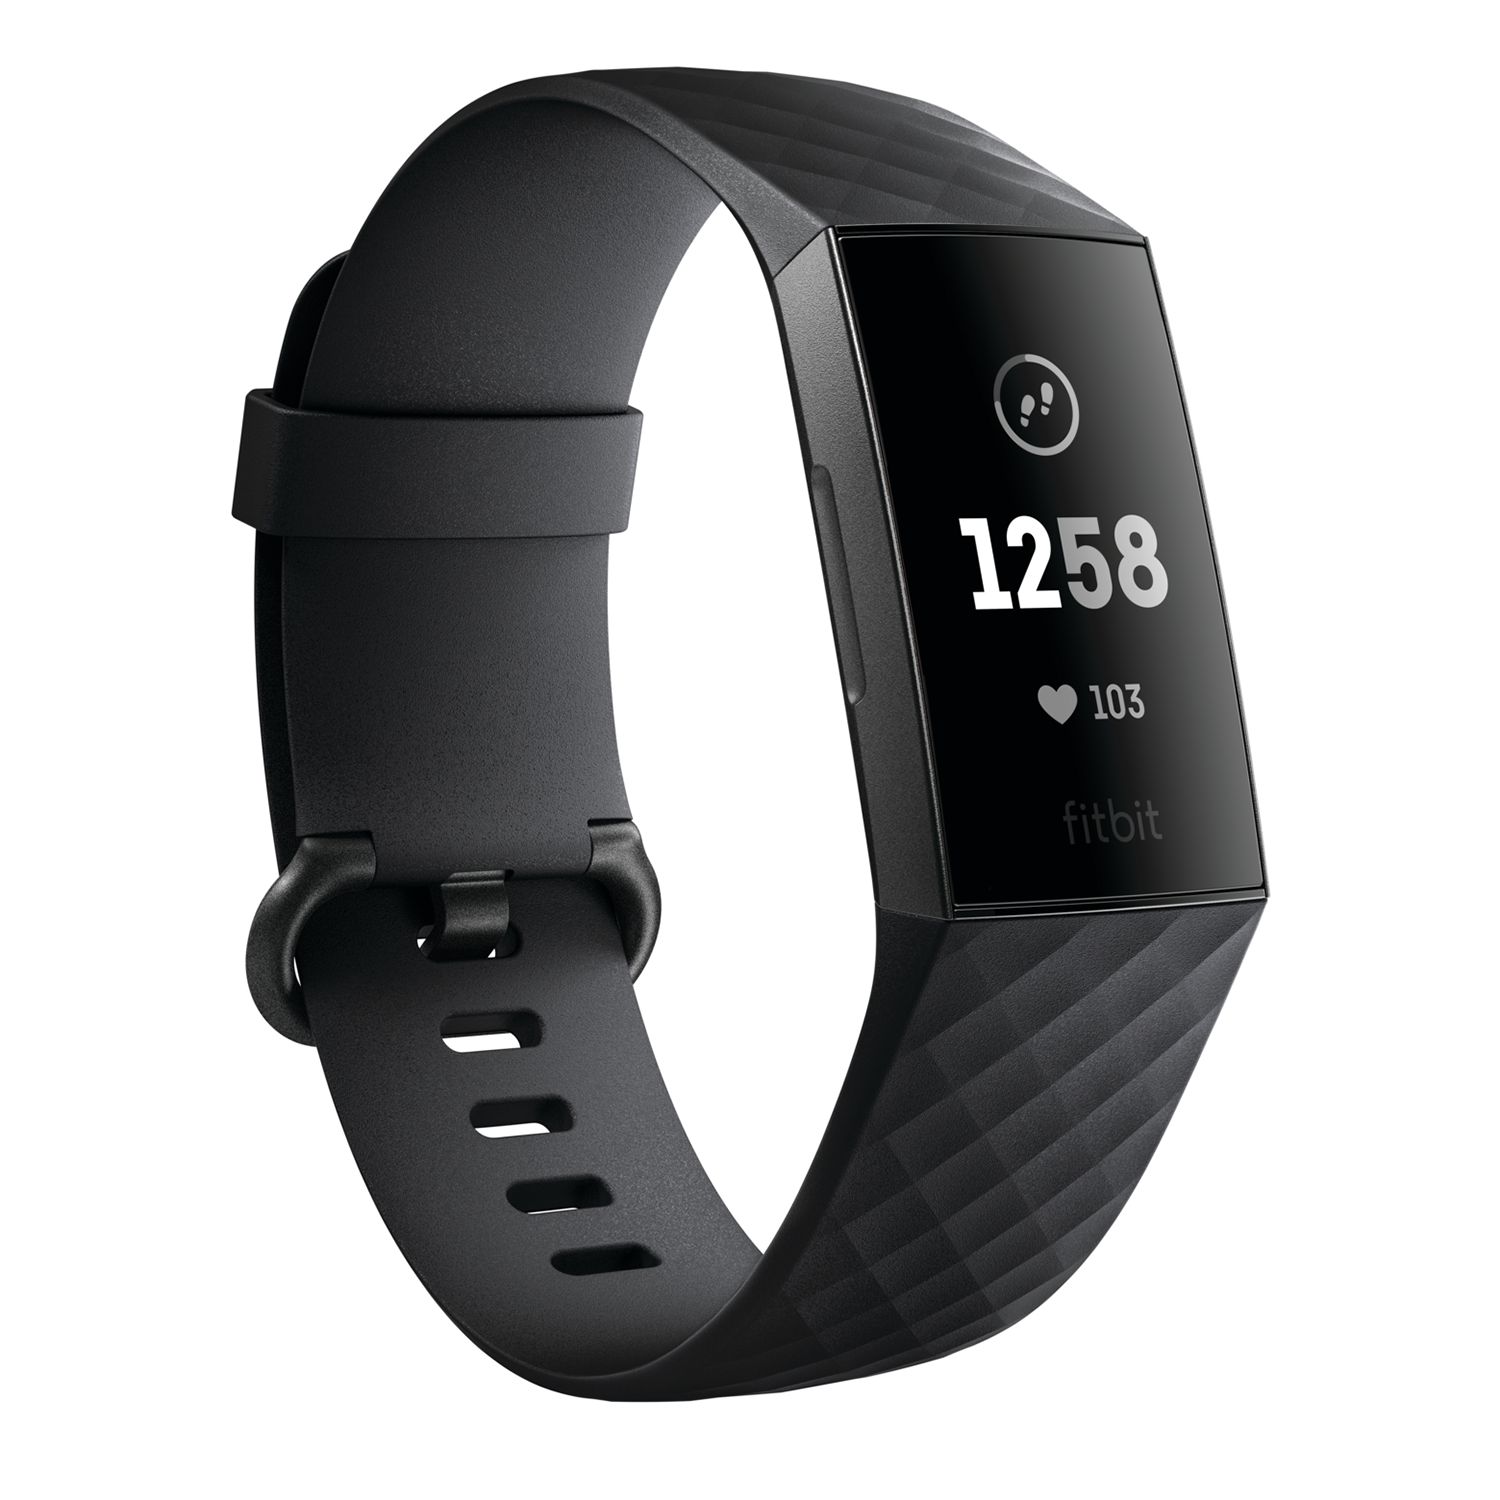 unable to set up fitbit charge 3